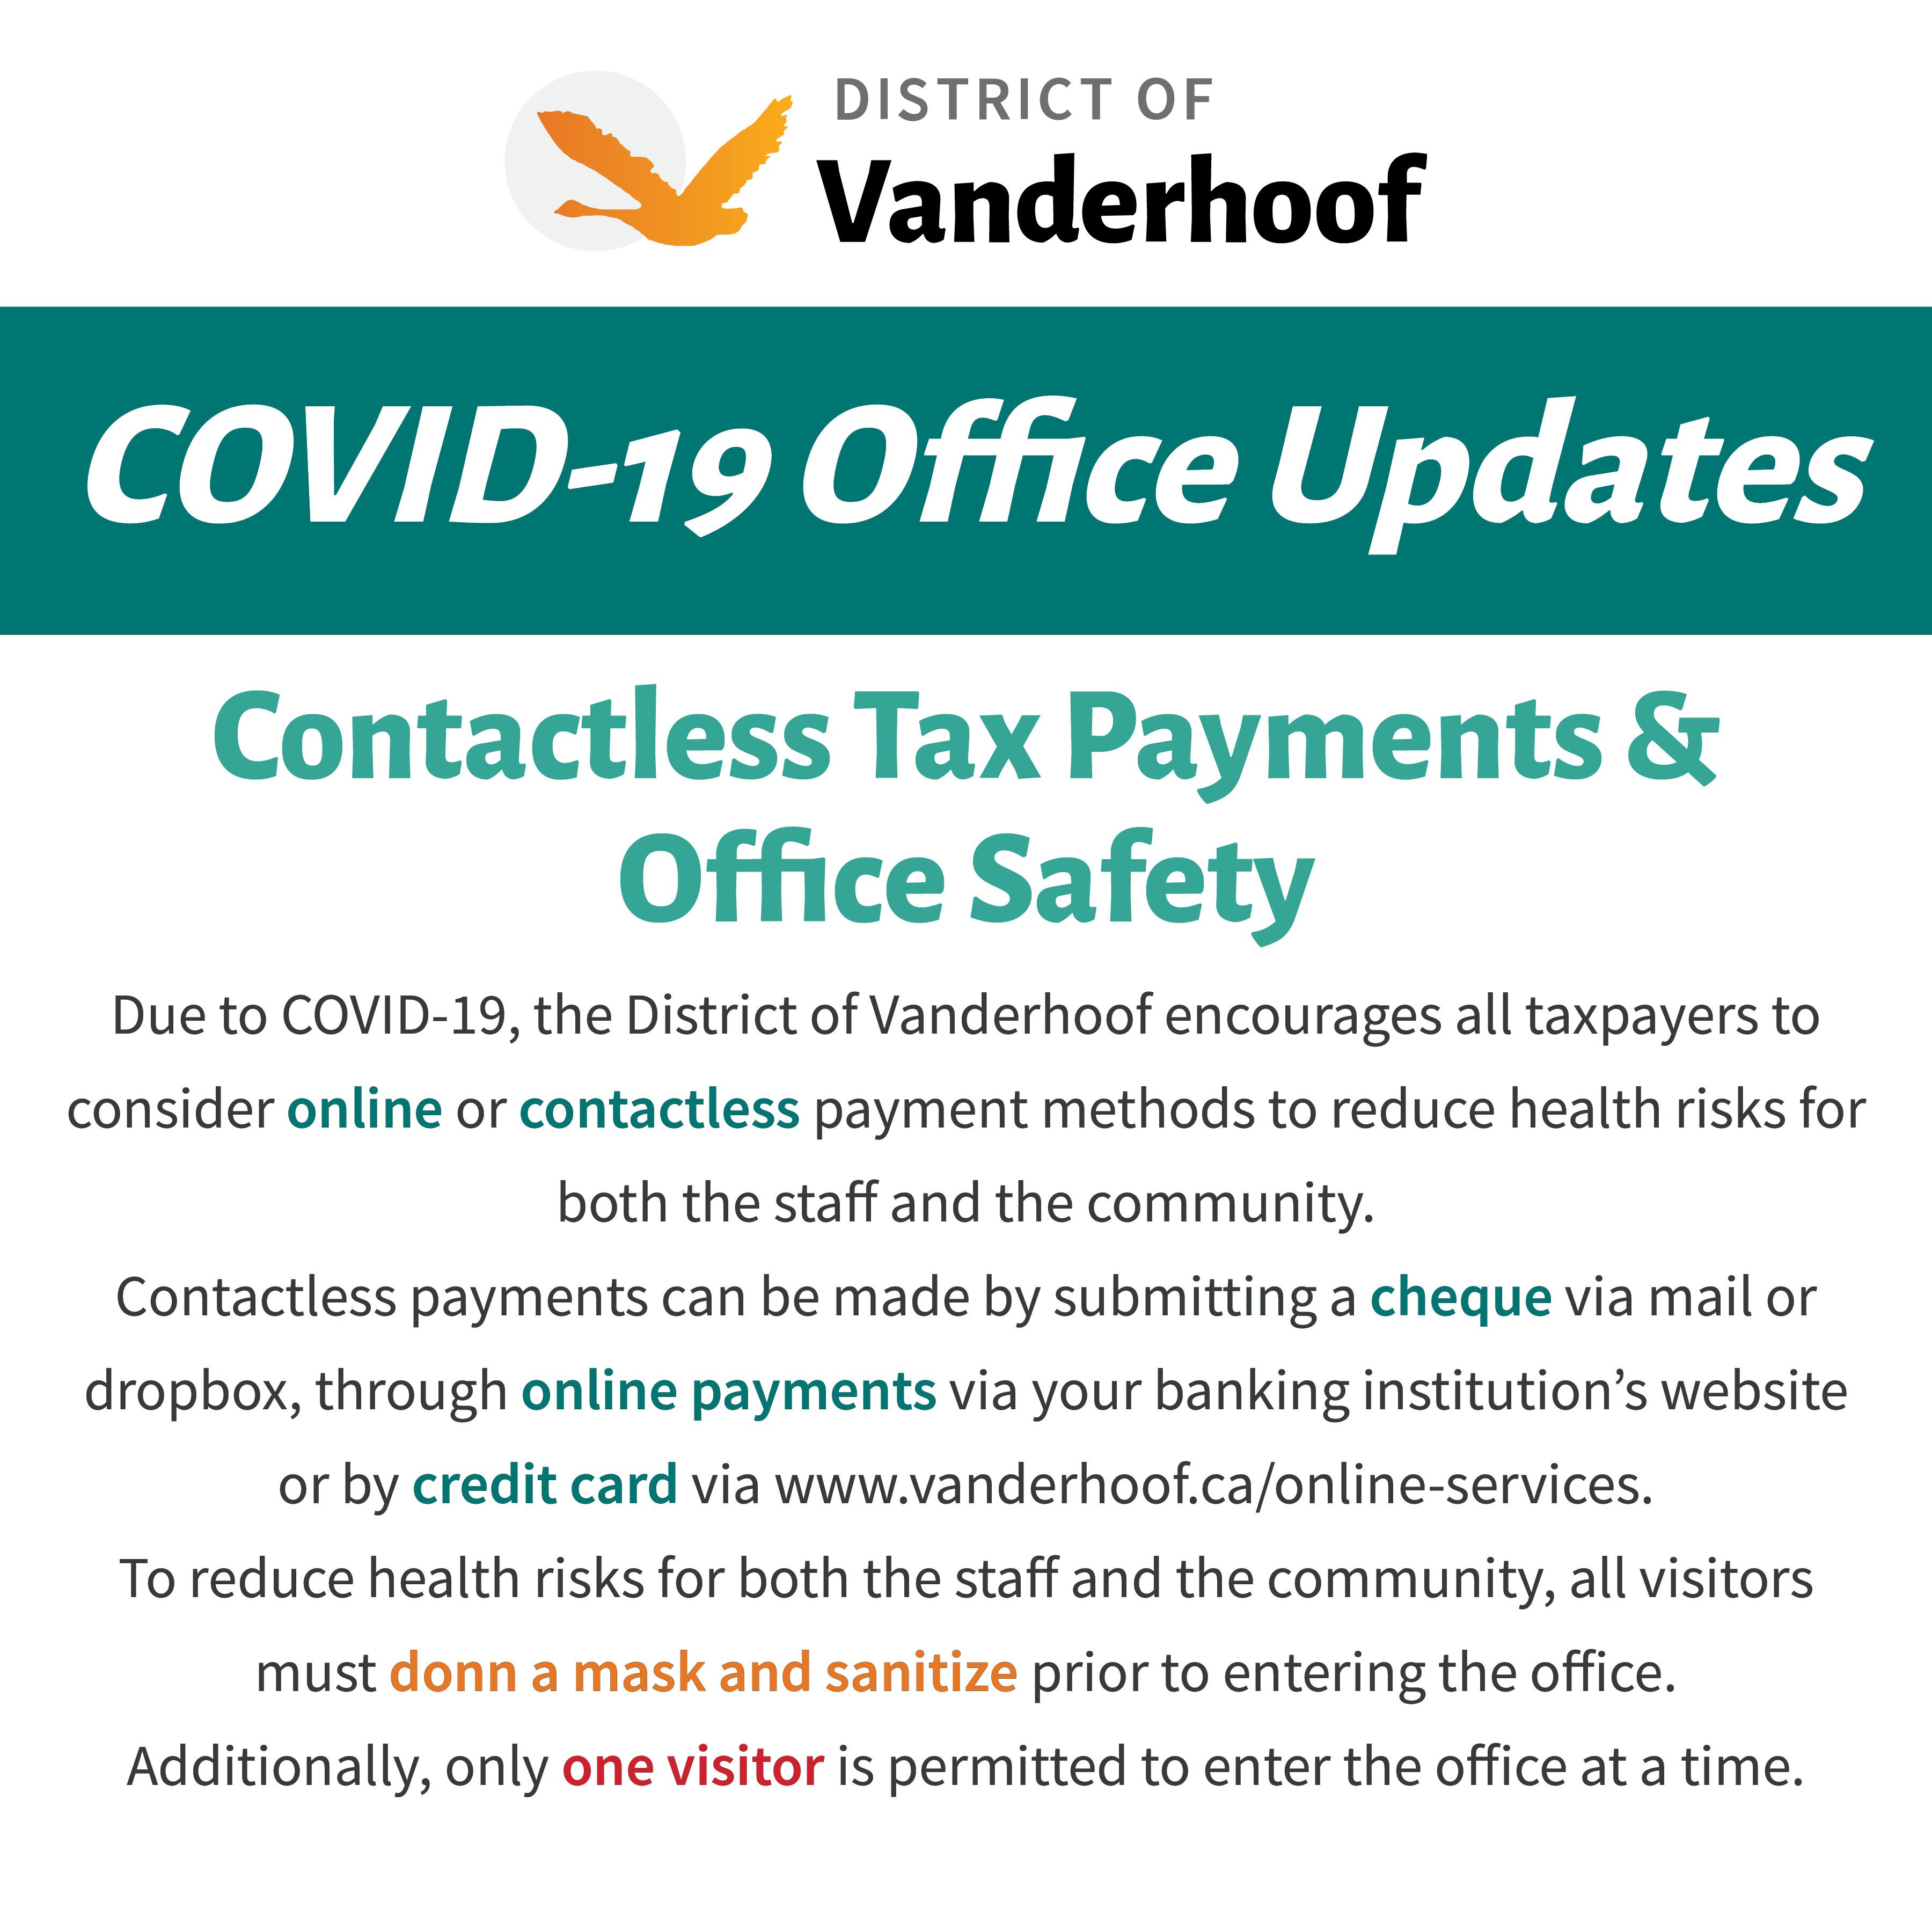 Due to COVID-19, the District of Vanderhoof encourages all taxpayers to consider online or contactless payment methods to reduce health risks for both the staff and the community.  Contactless payments can be made by submitting a cheque via mail or dropbox, through online payments via your banking institution’s website or by credit card via www.vanderhoof.ca/online-services. To reduce health risks for both the staff and the community, all visitors must donn a mask and sanitize prior to entering the office.  Additionally, only one visitor is permitted to enter the office at a time.